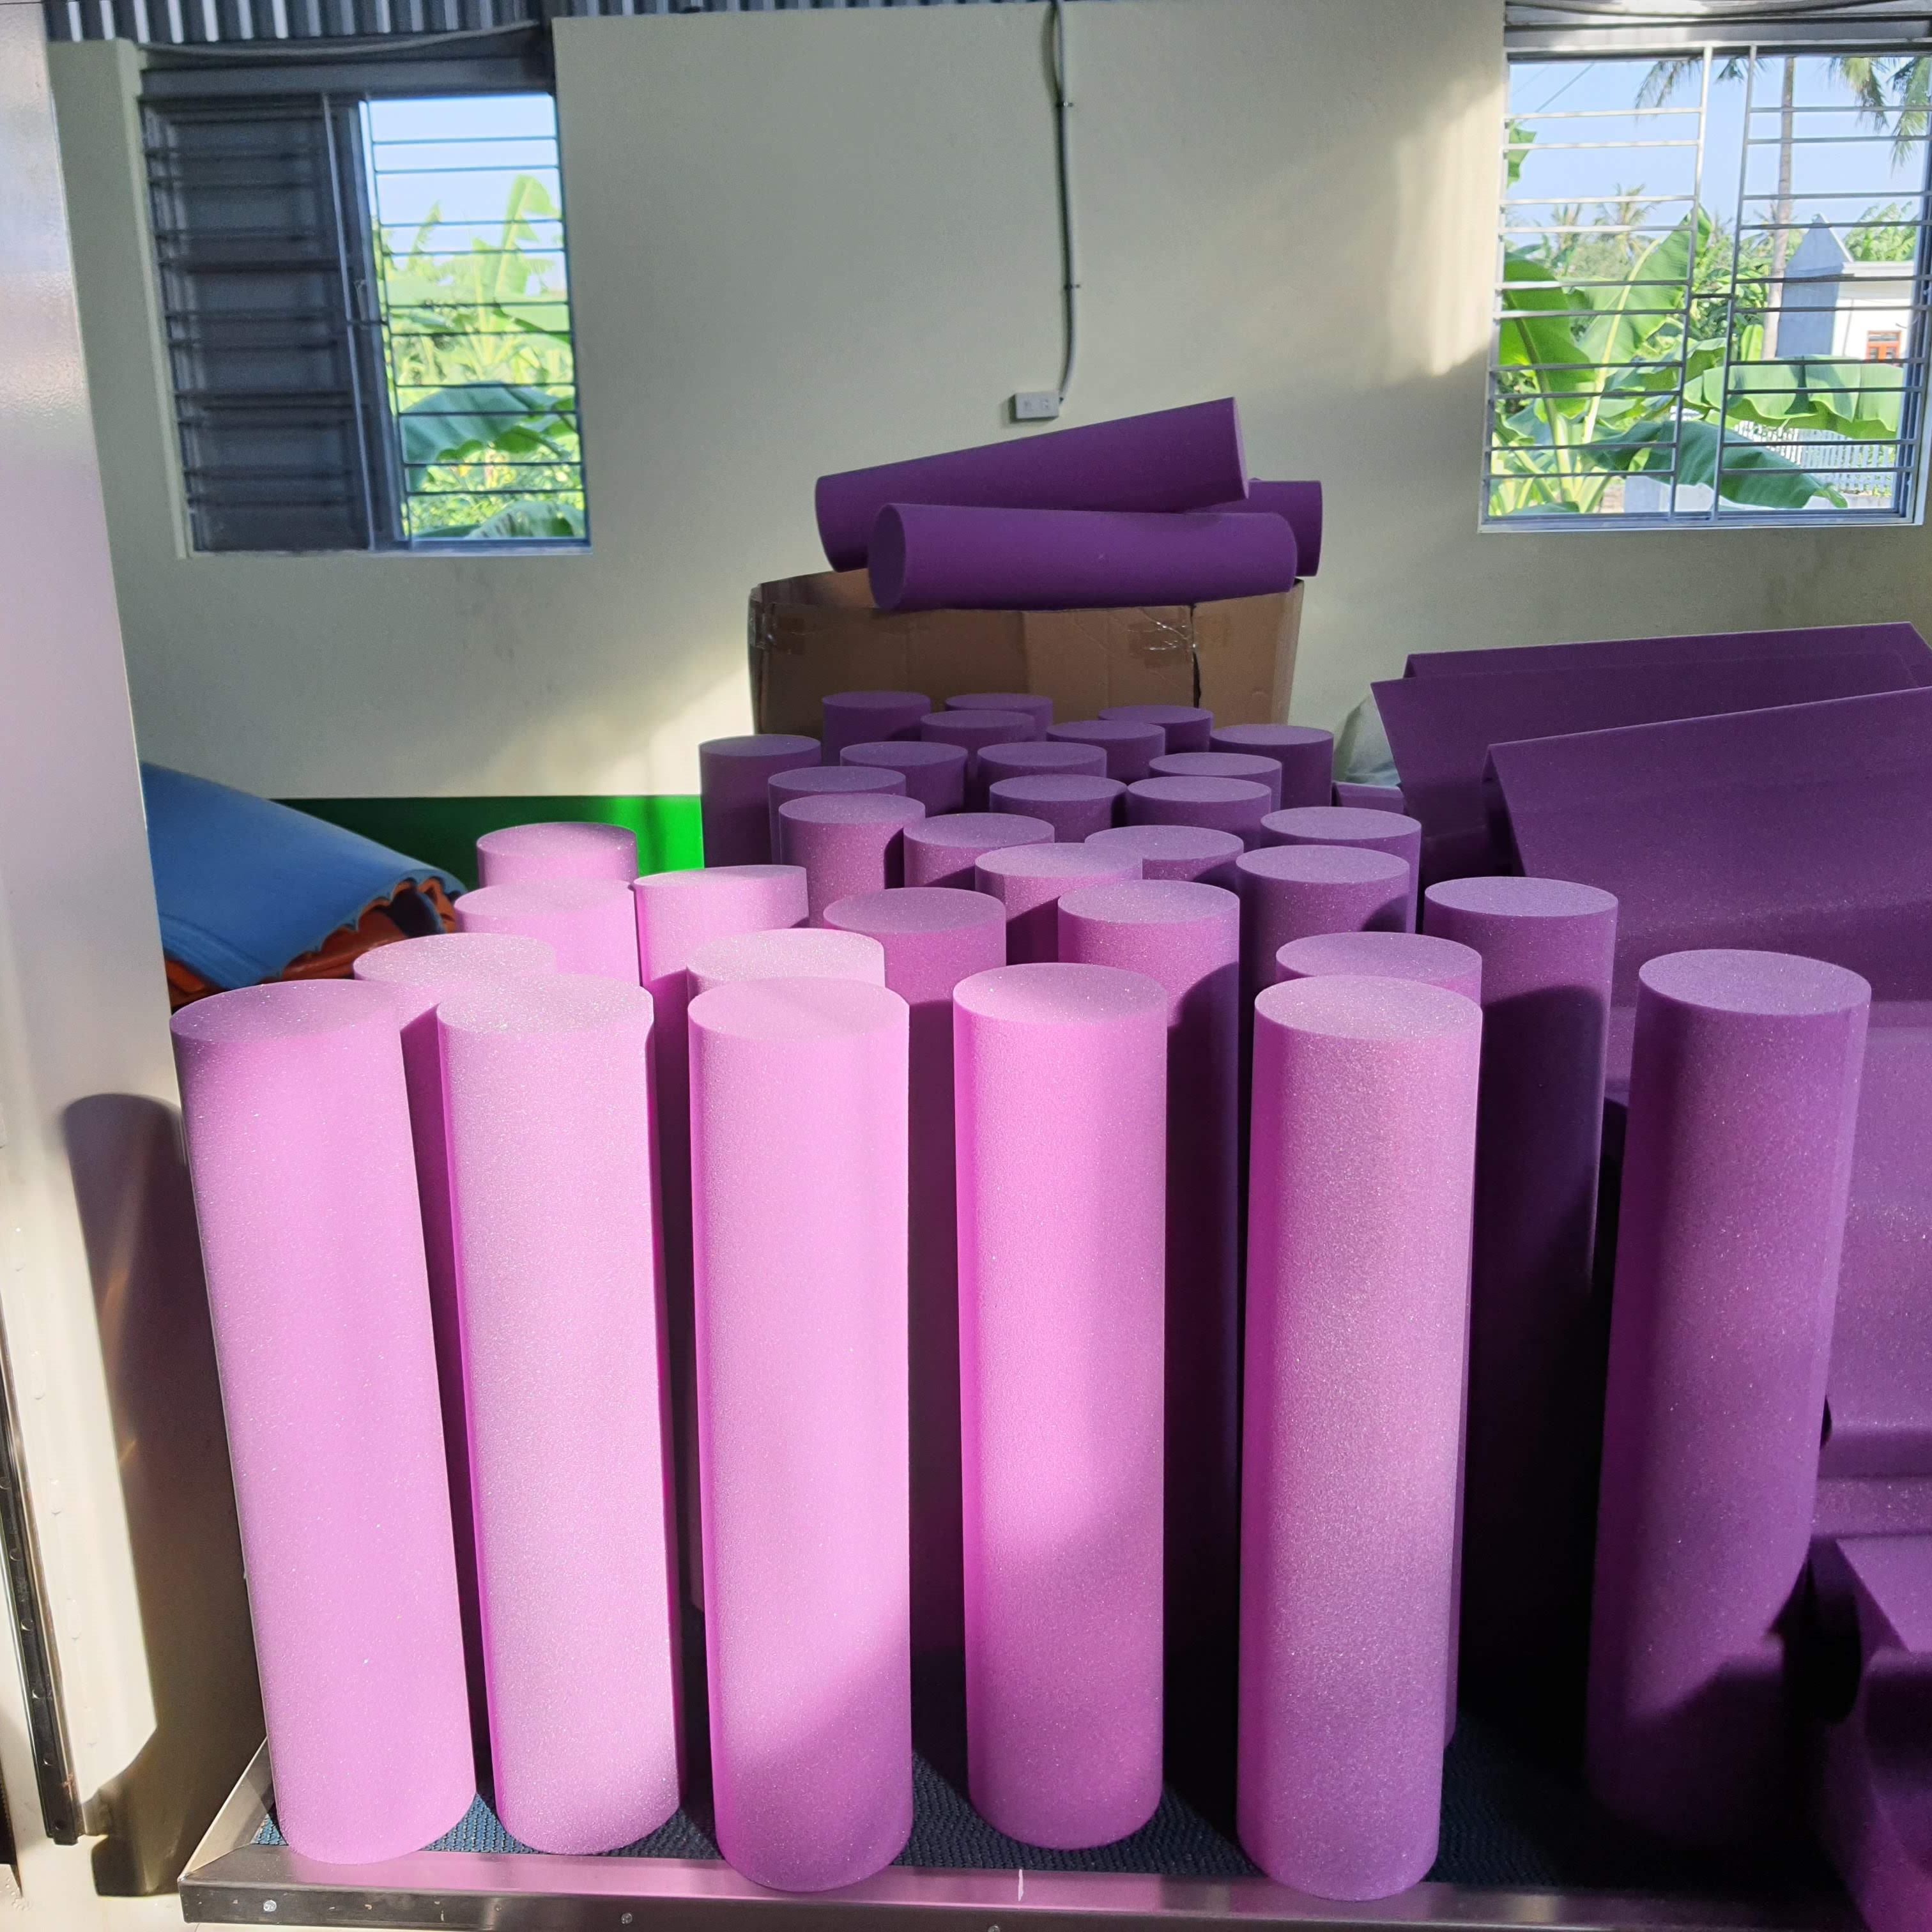 Polyurethane Foam Sheets Fast Delivery Design Freedom Pu Foam Mold Cartons Made in Vietnam Manufacturer